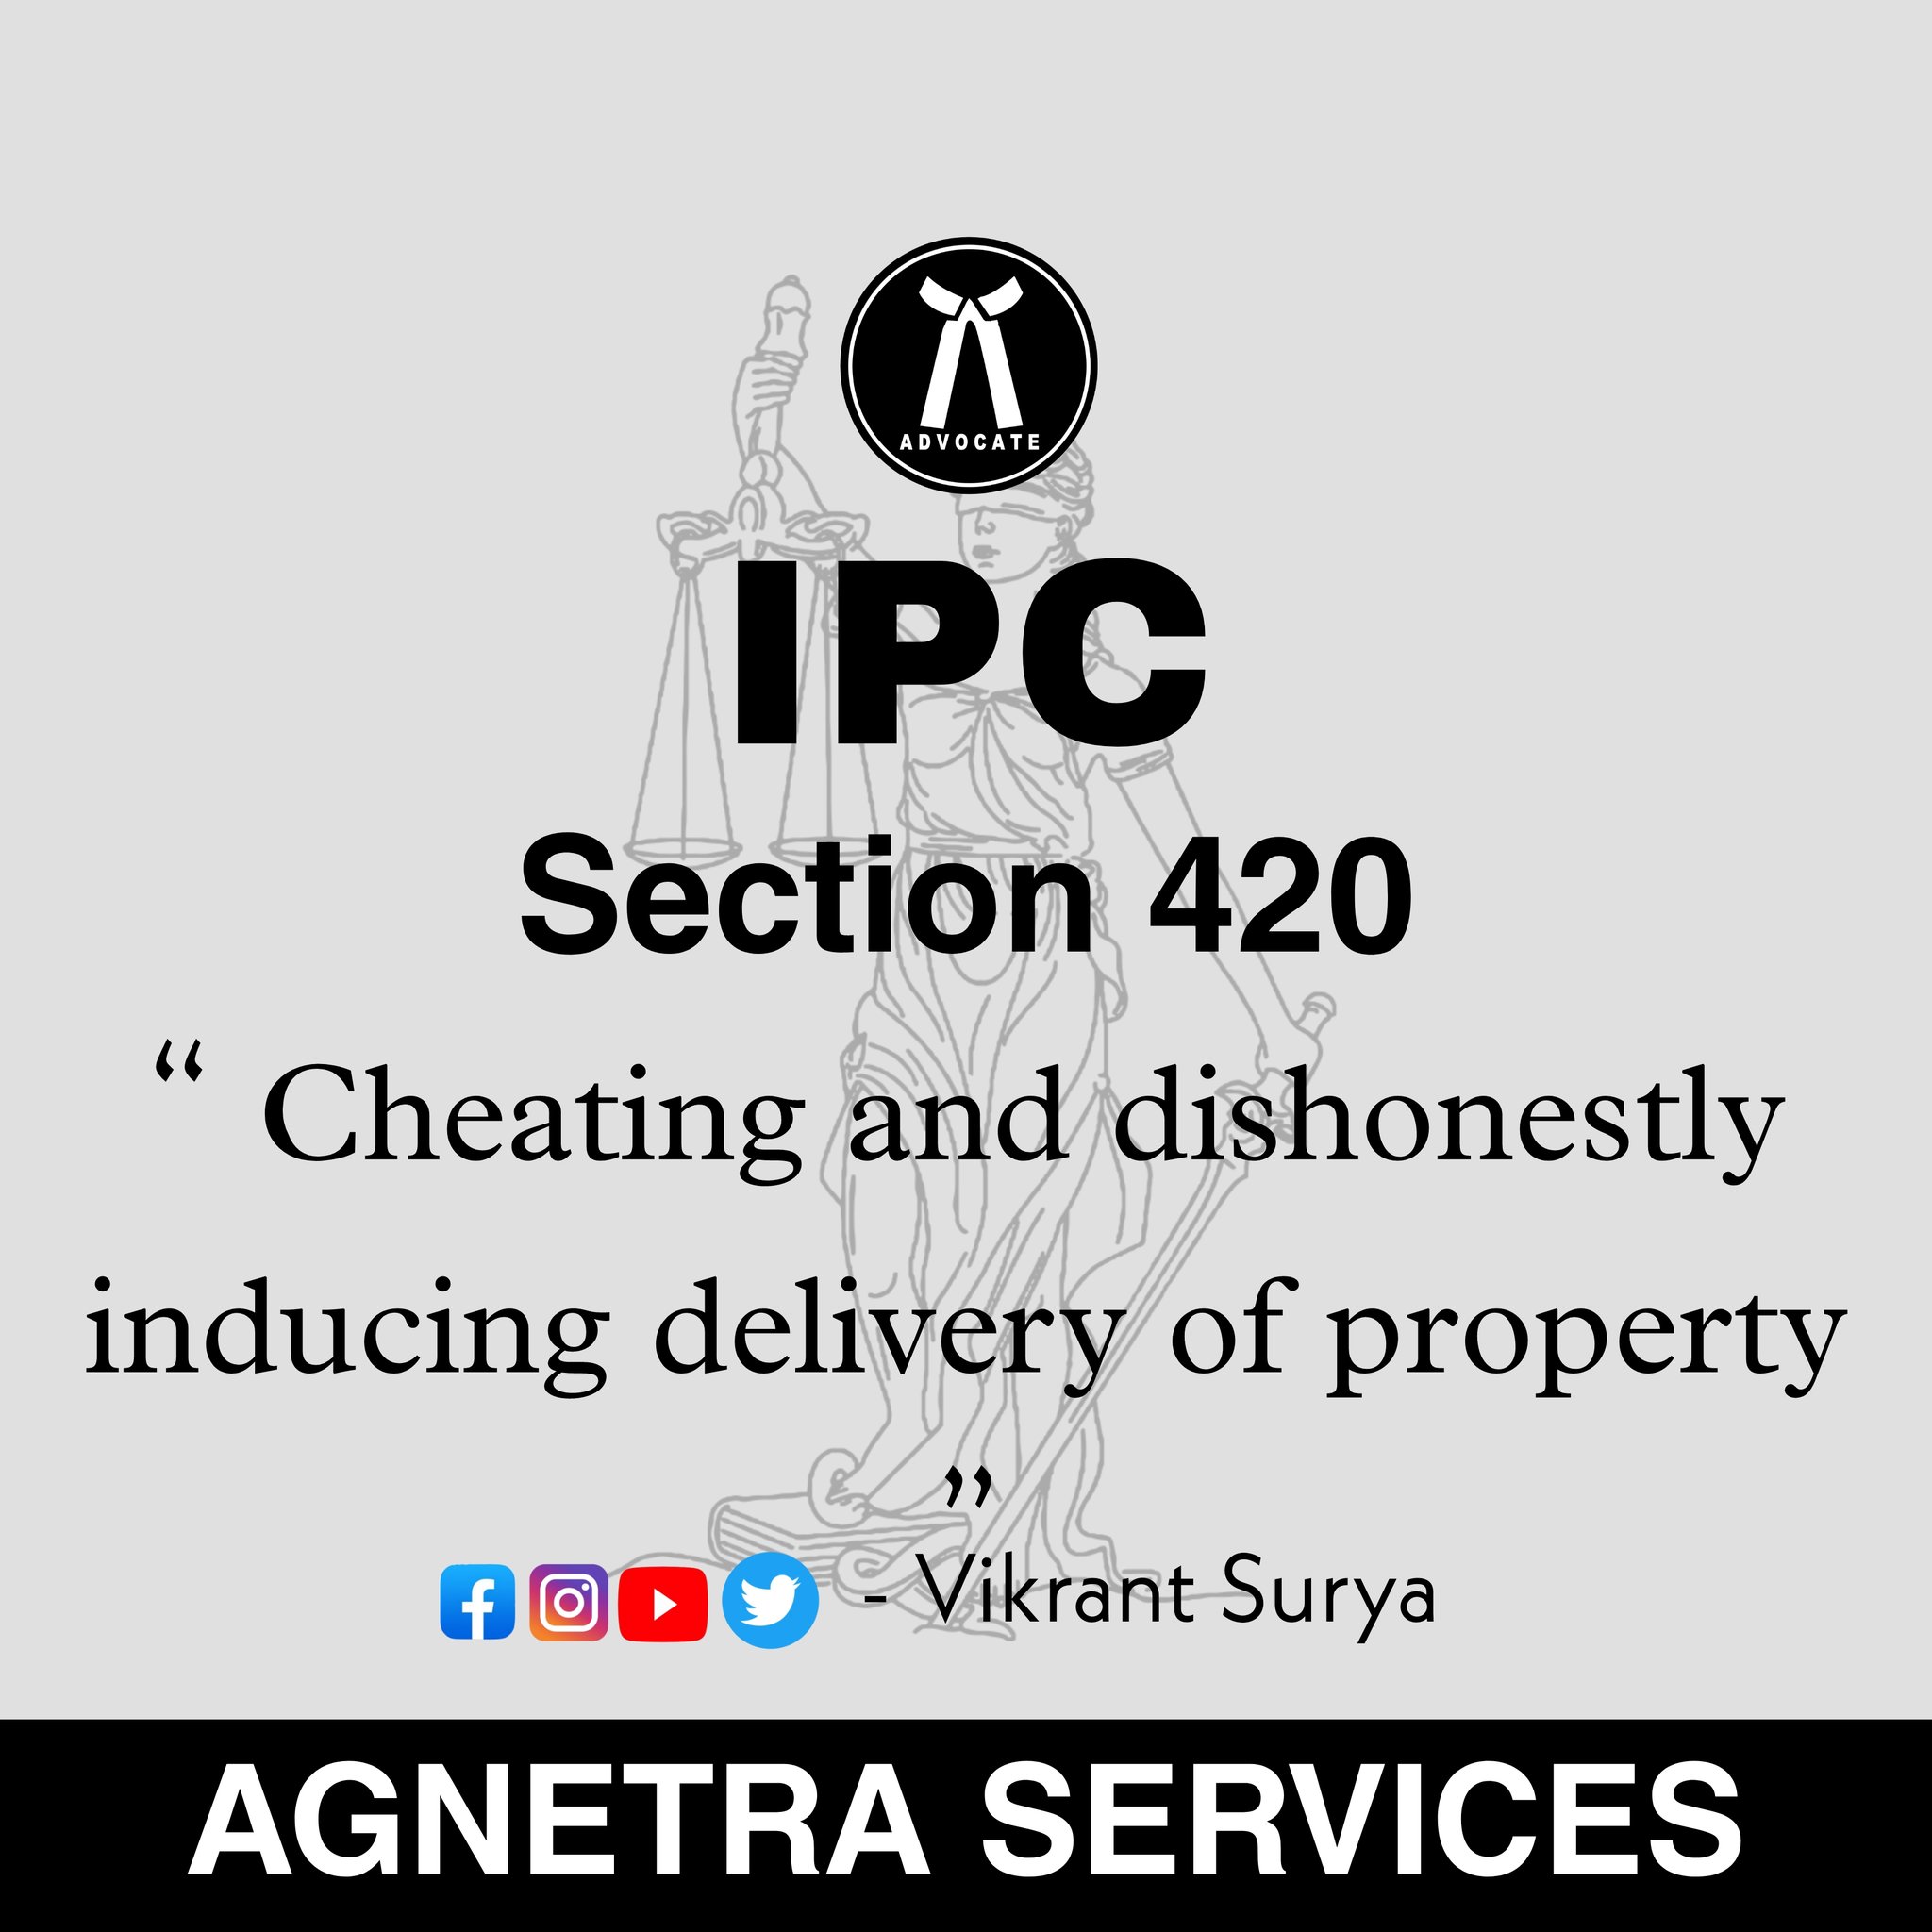 Vikrant Surya on X: You now 420 meaning. #ipc #constitution